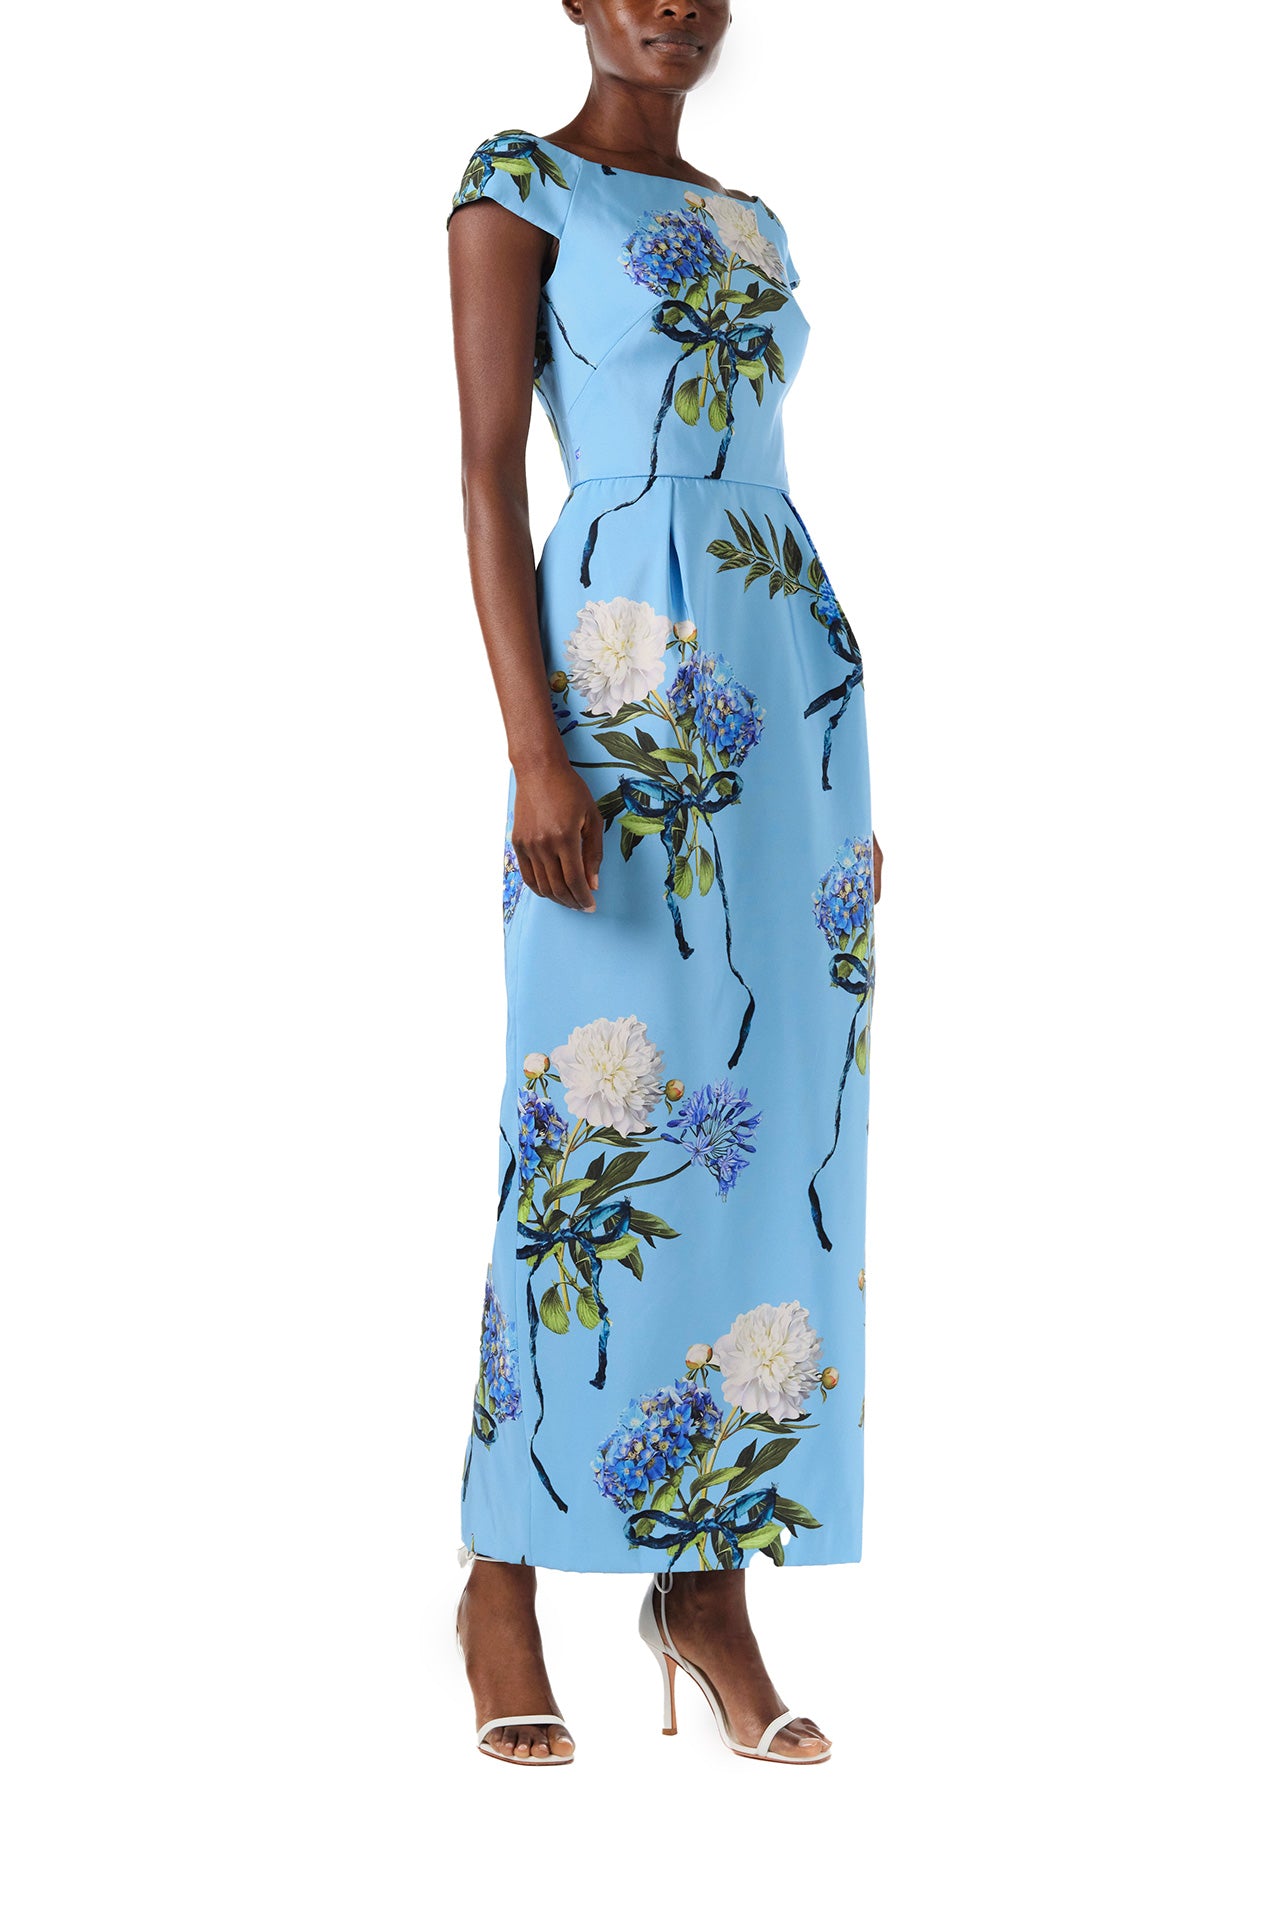 Monique Lhuillier Spring 2024 column gown with bateau neckline, cap sleeves and pockets in Sky Blue Hydrangea printed silk faille - right side.